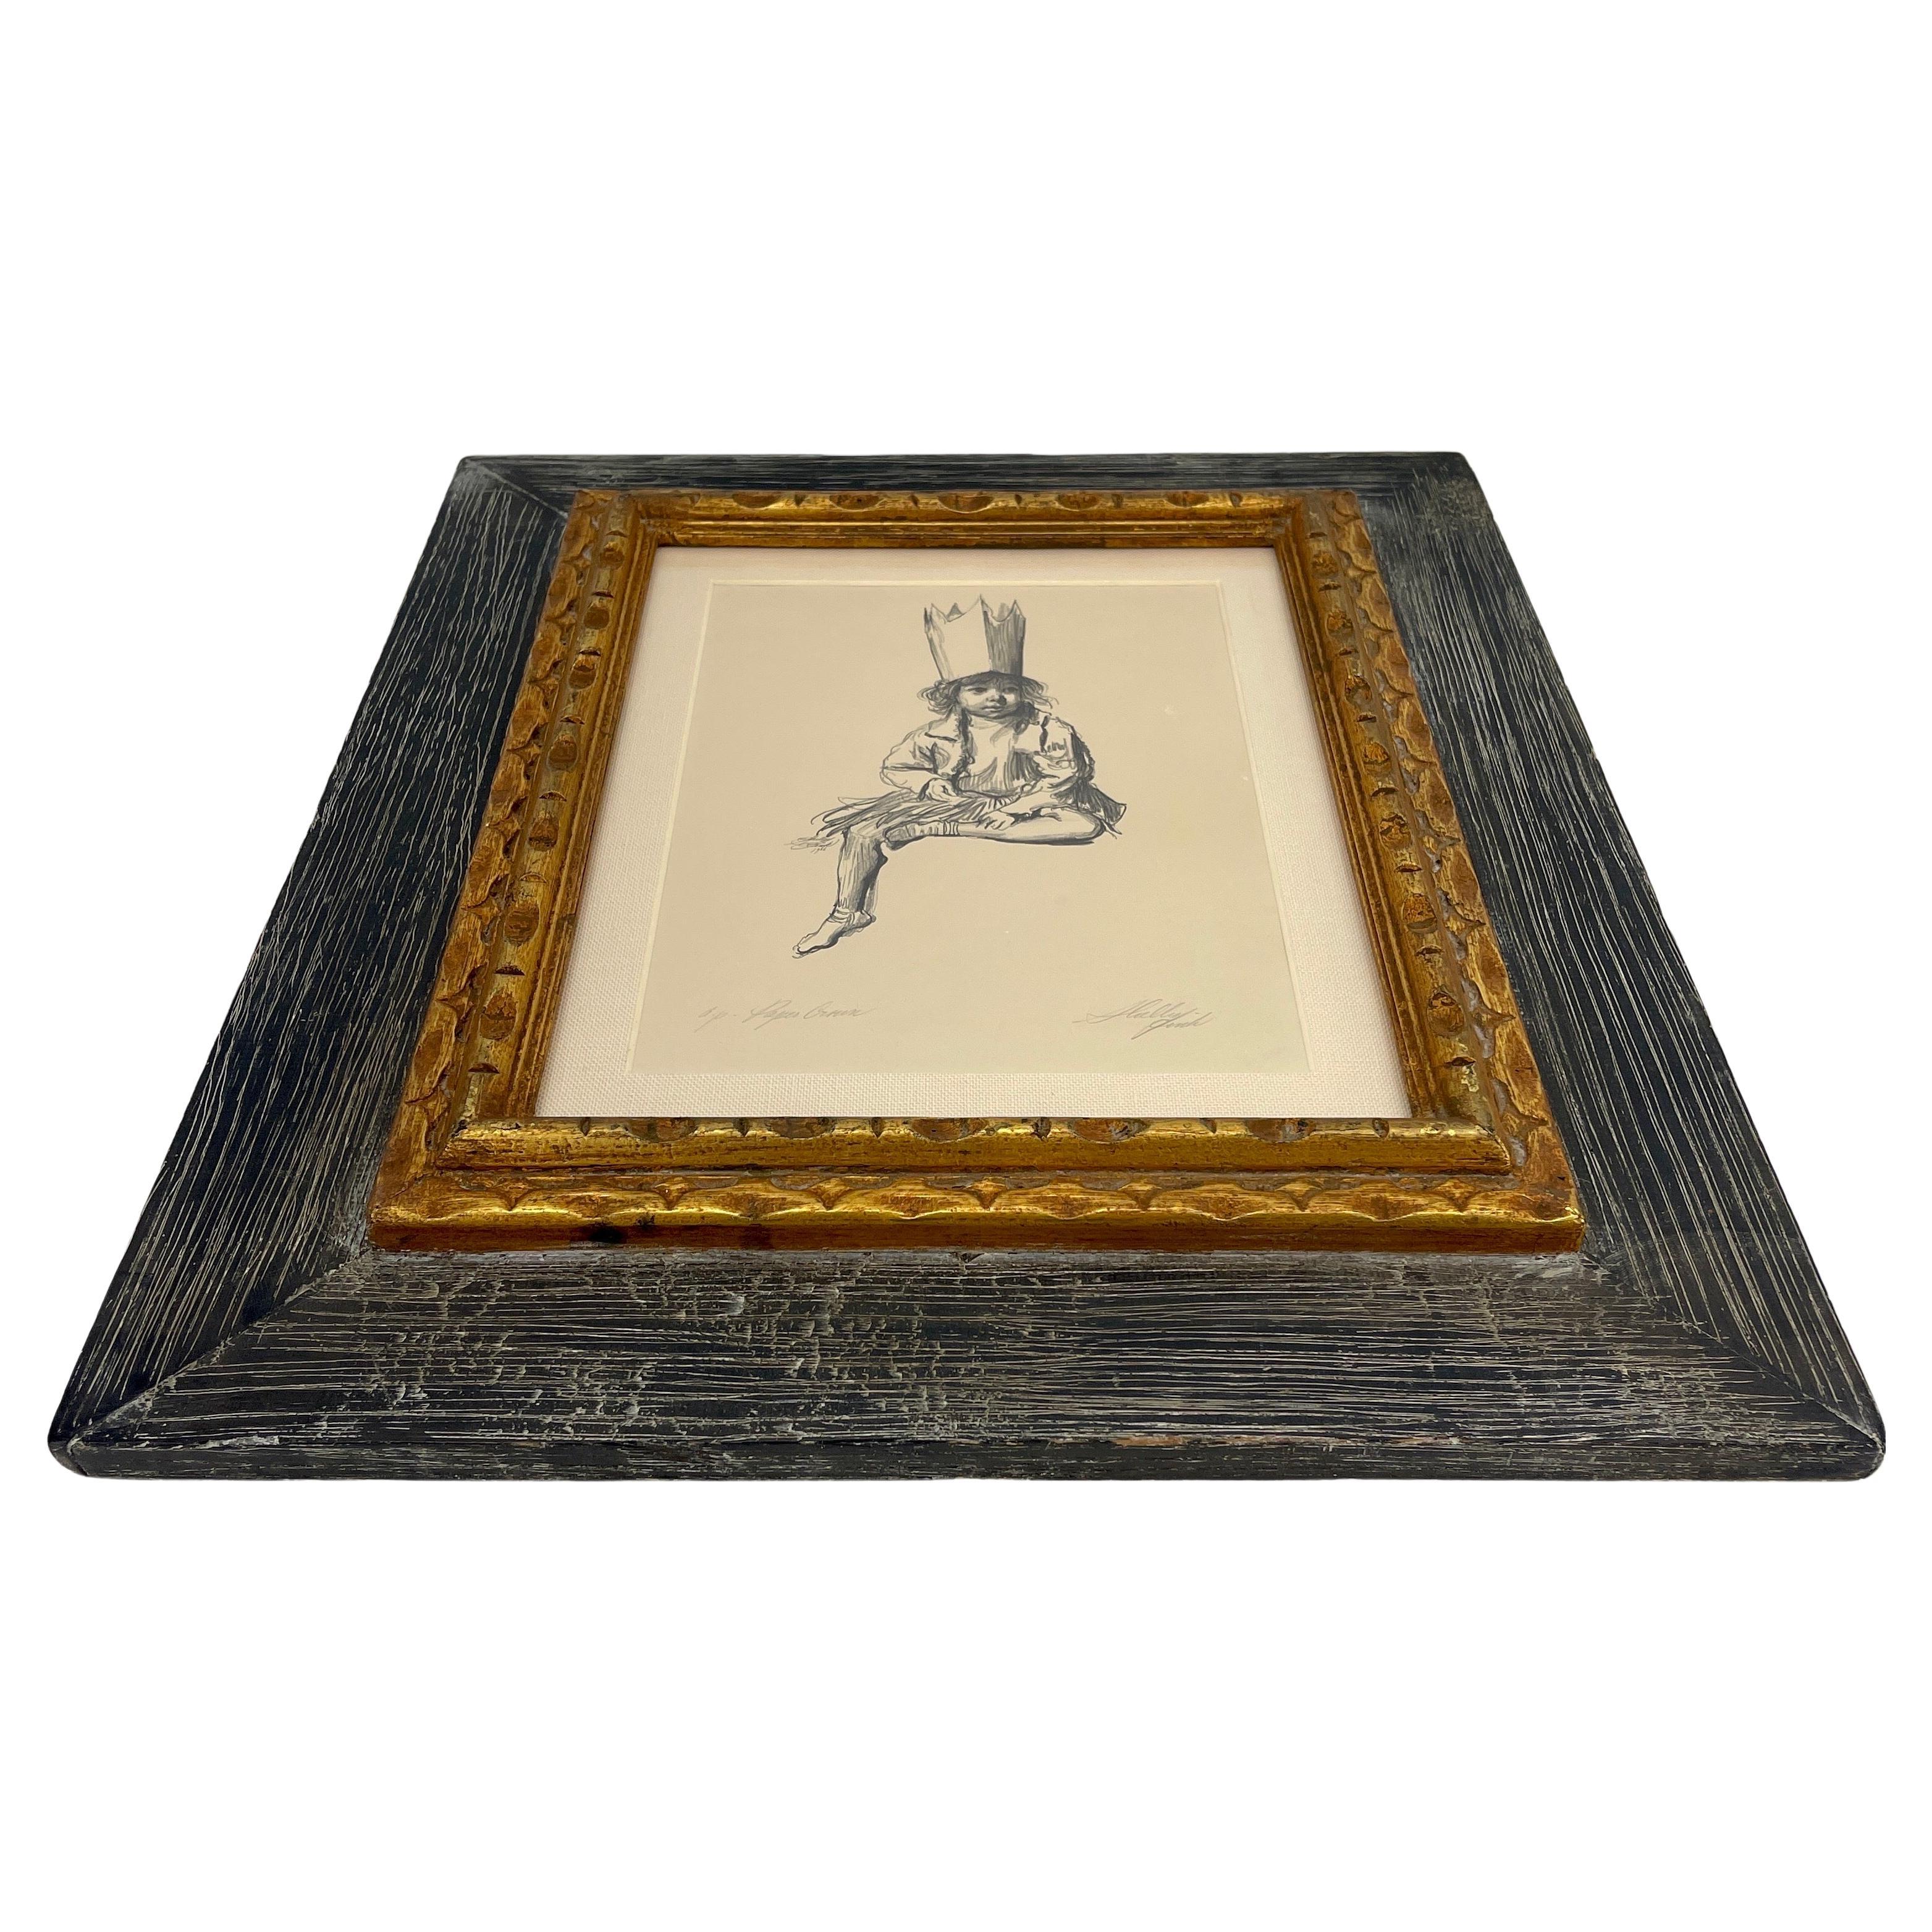 Sheldon Shelly Fink Etching on Paper Titled Paper Crown, Mid-Century Art

Etching on paper, signed, numbered and titled in pencil. Artists proof circa 1966. This particular piece has been framed in a wood frame with gold highlights. Wonderful